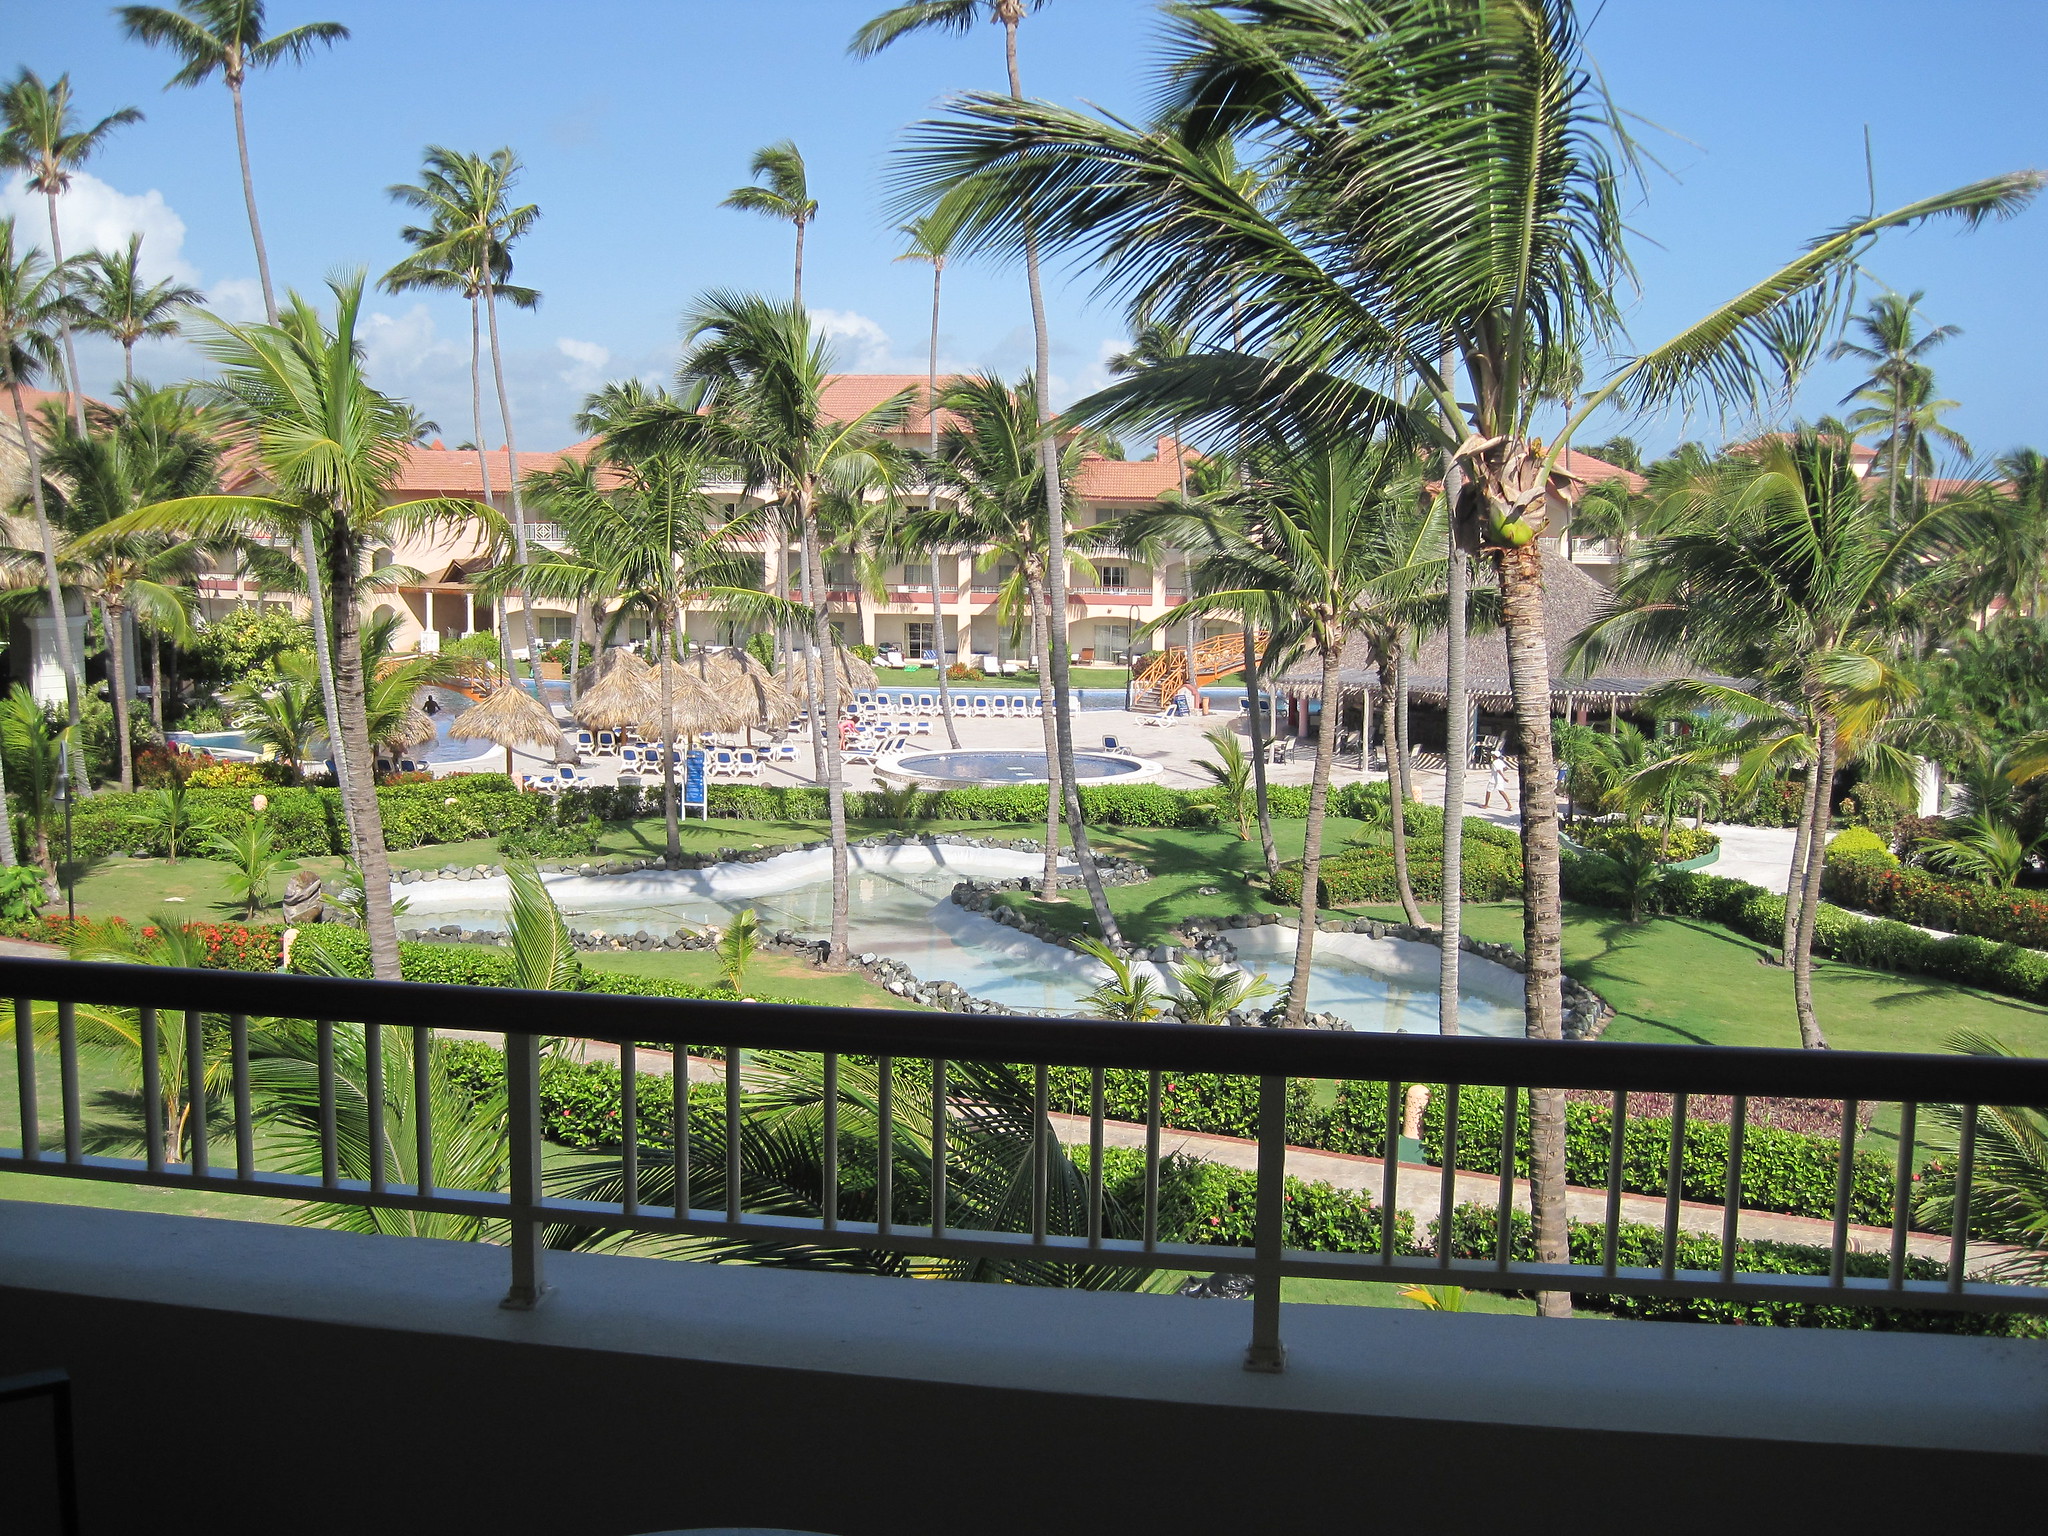 Many coconut trees and multiple pools at the grounds of Majestic Colonial Punta Cana, one of the best all-inclusive resorts in Punta Cana